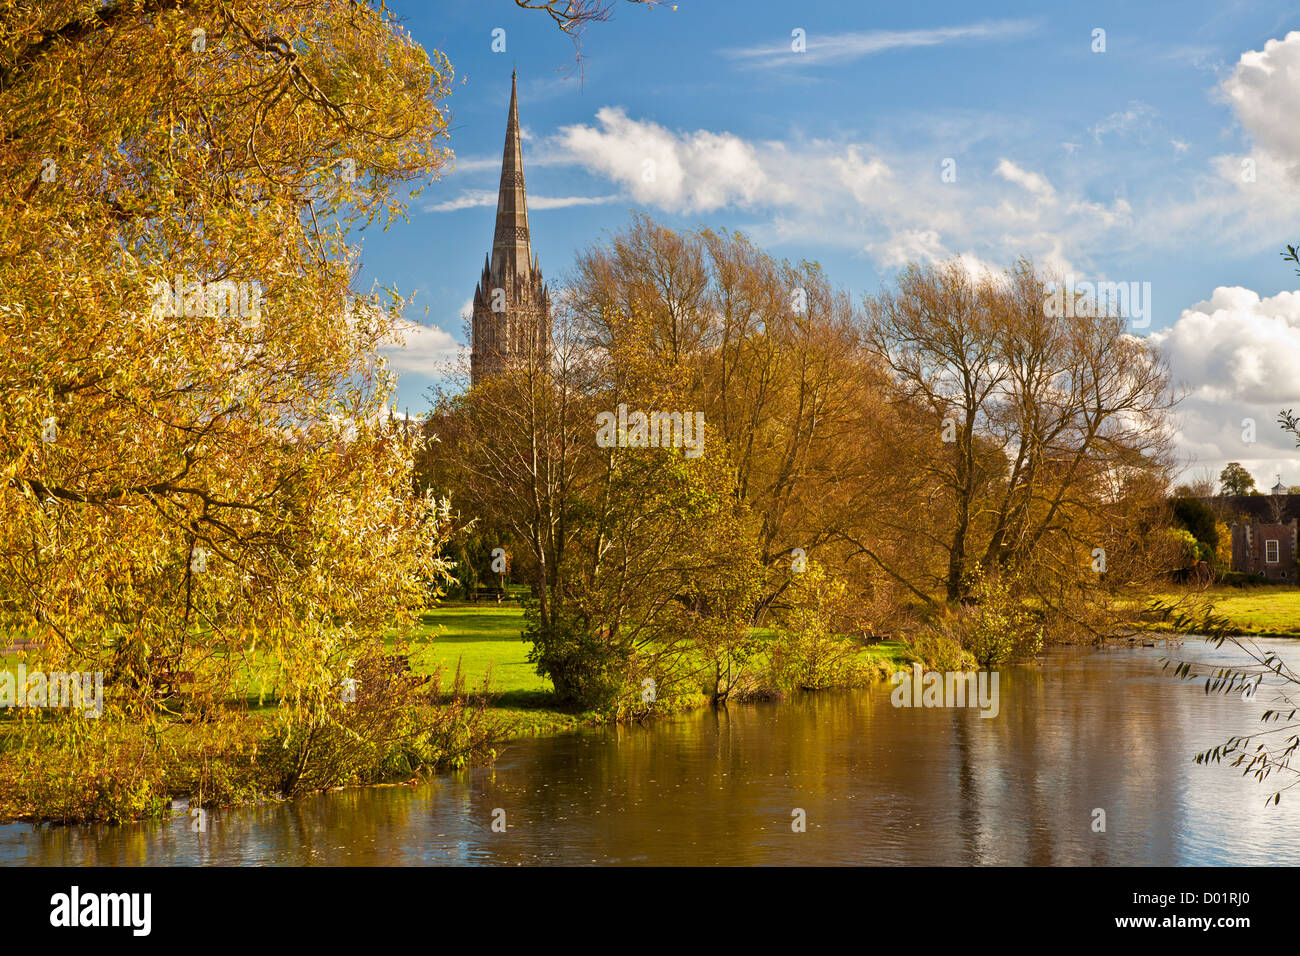 An autumn view of the spire of medieval Salisbury Cathedral, Wiltshire, England, UK with the River Avon in the foreground. Stock Photo